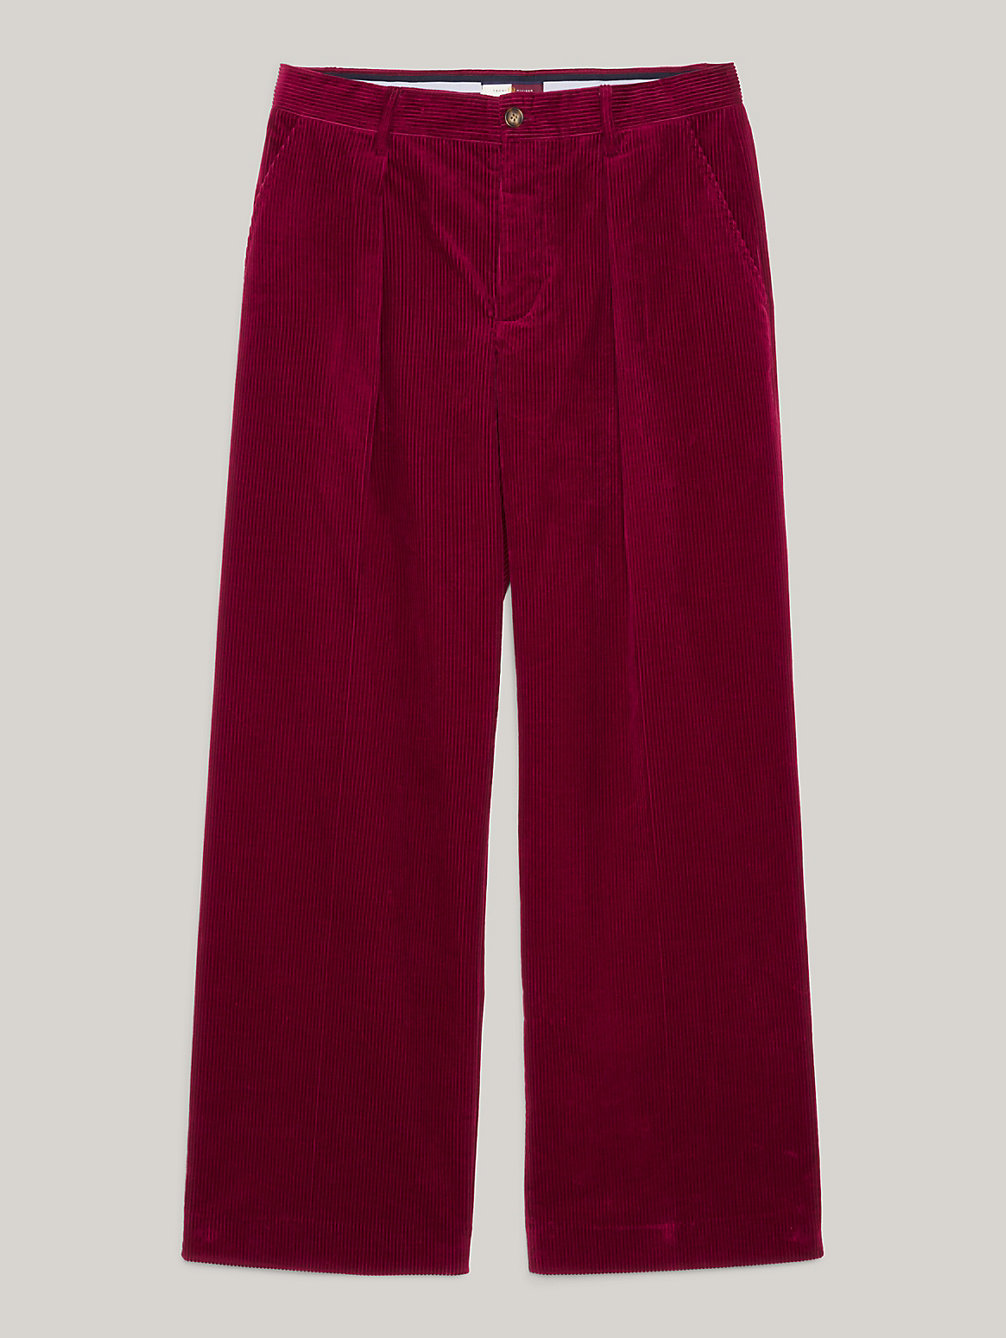 pantaloni chino relaxed fit in velluto red da uomo tommy hilfiger